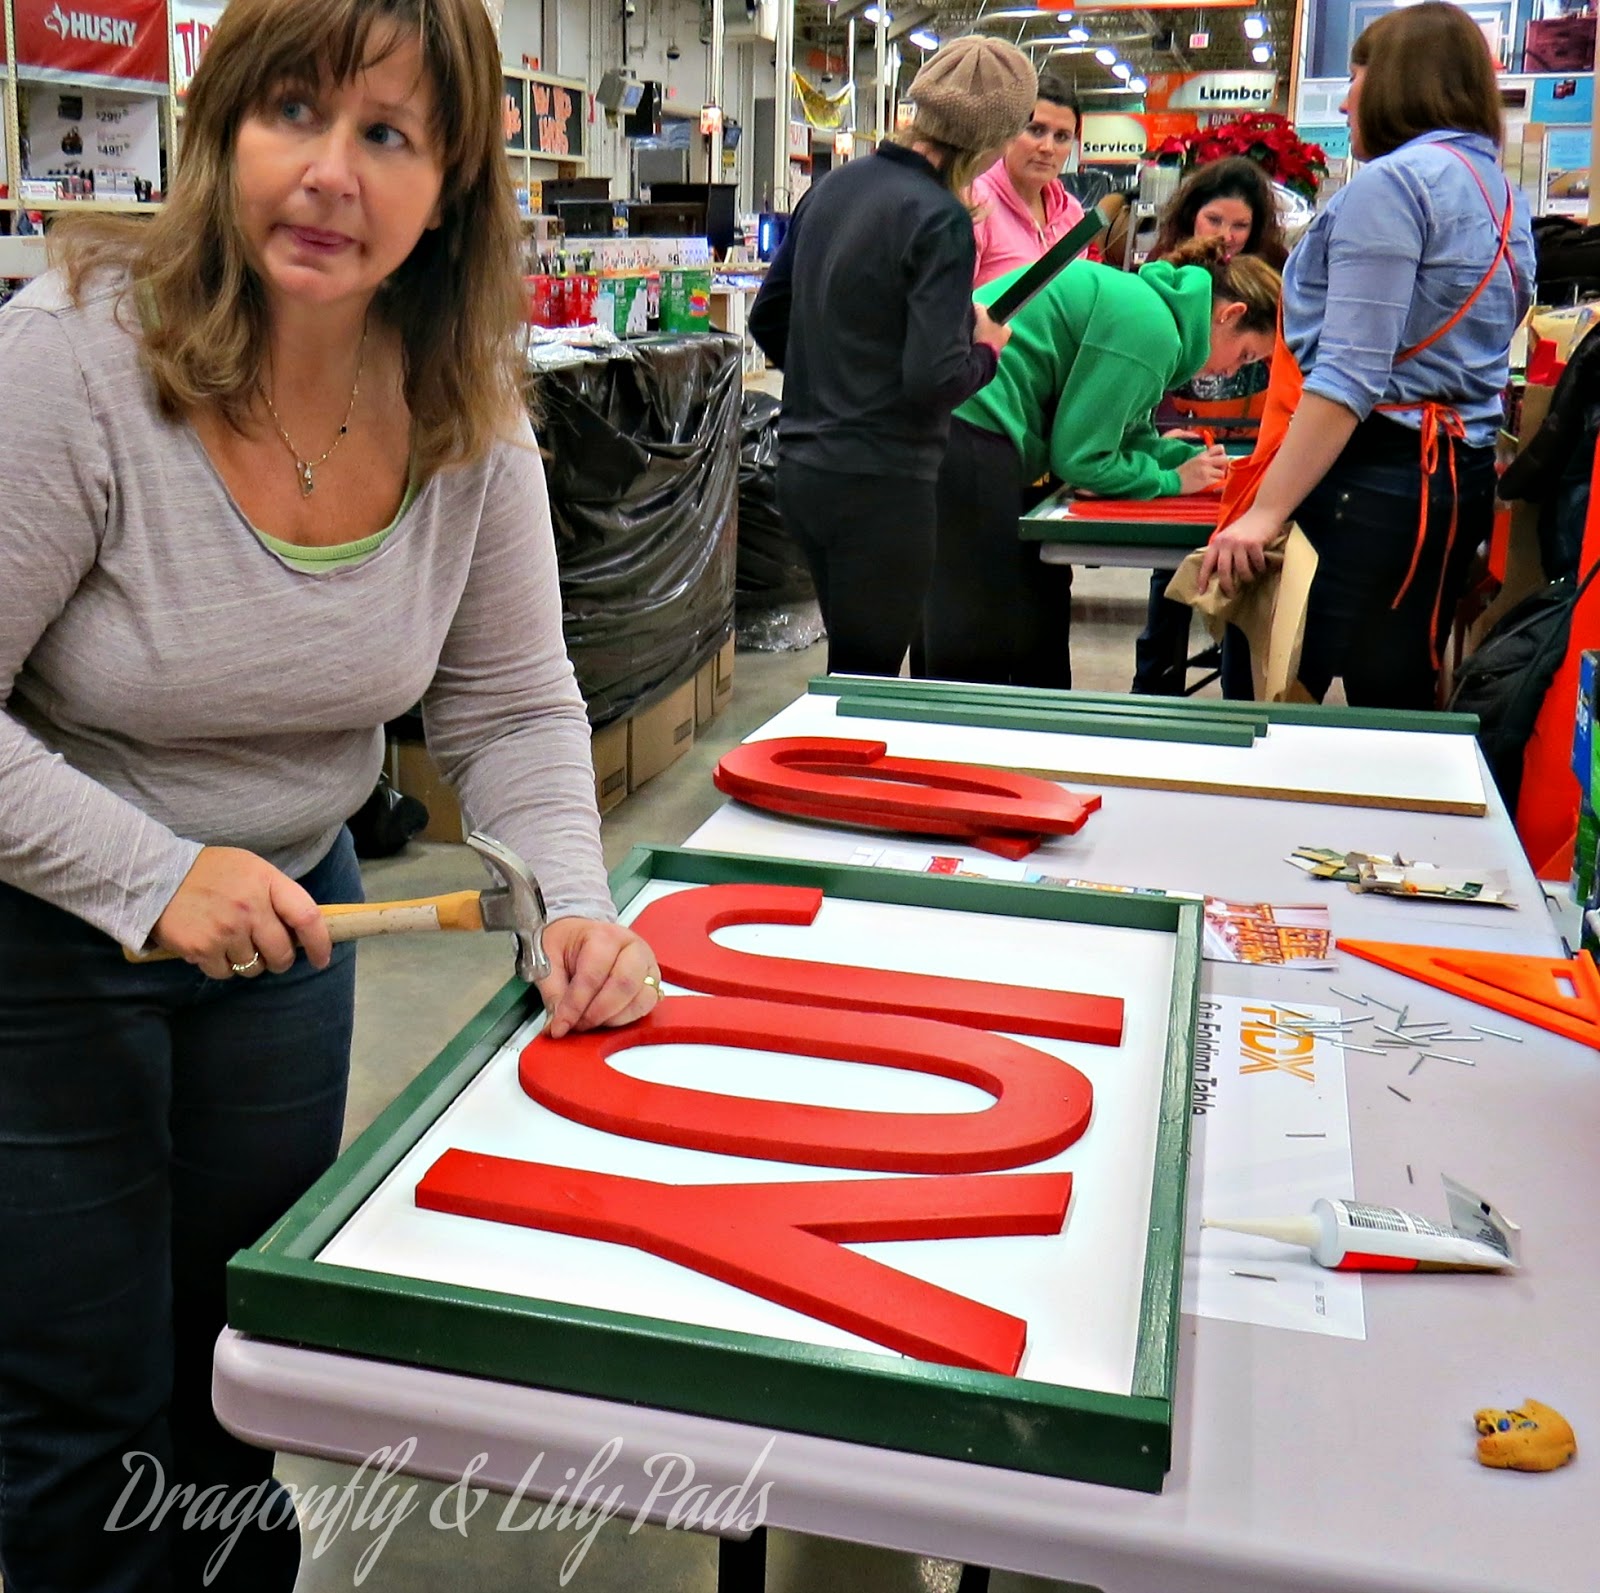 Women working at Her It Yourself Workshop in Home Depot Joy Marquee sign